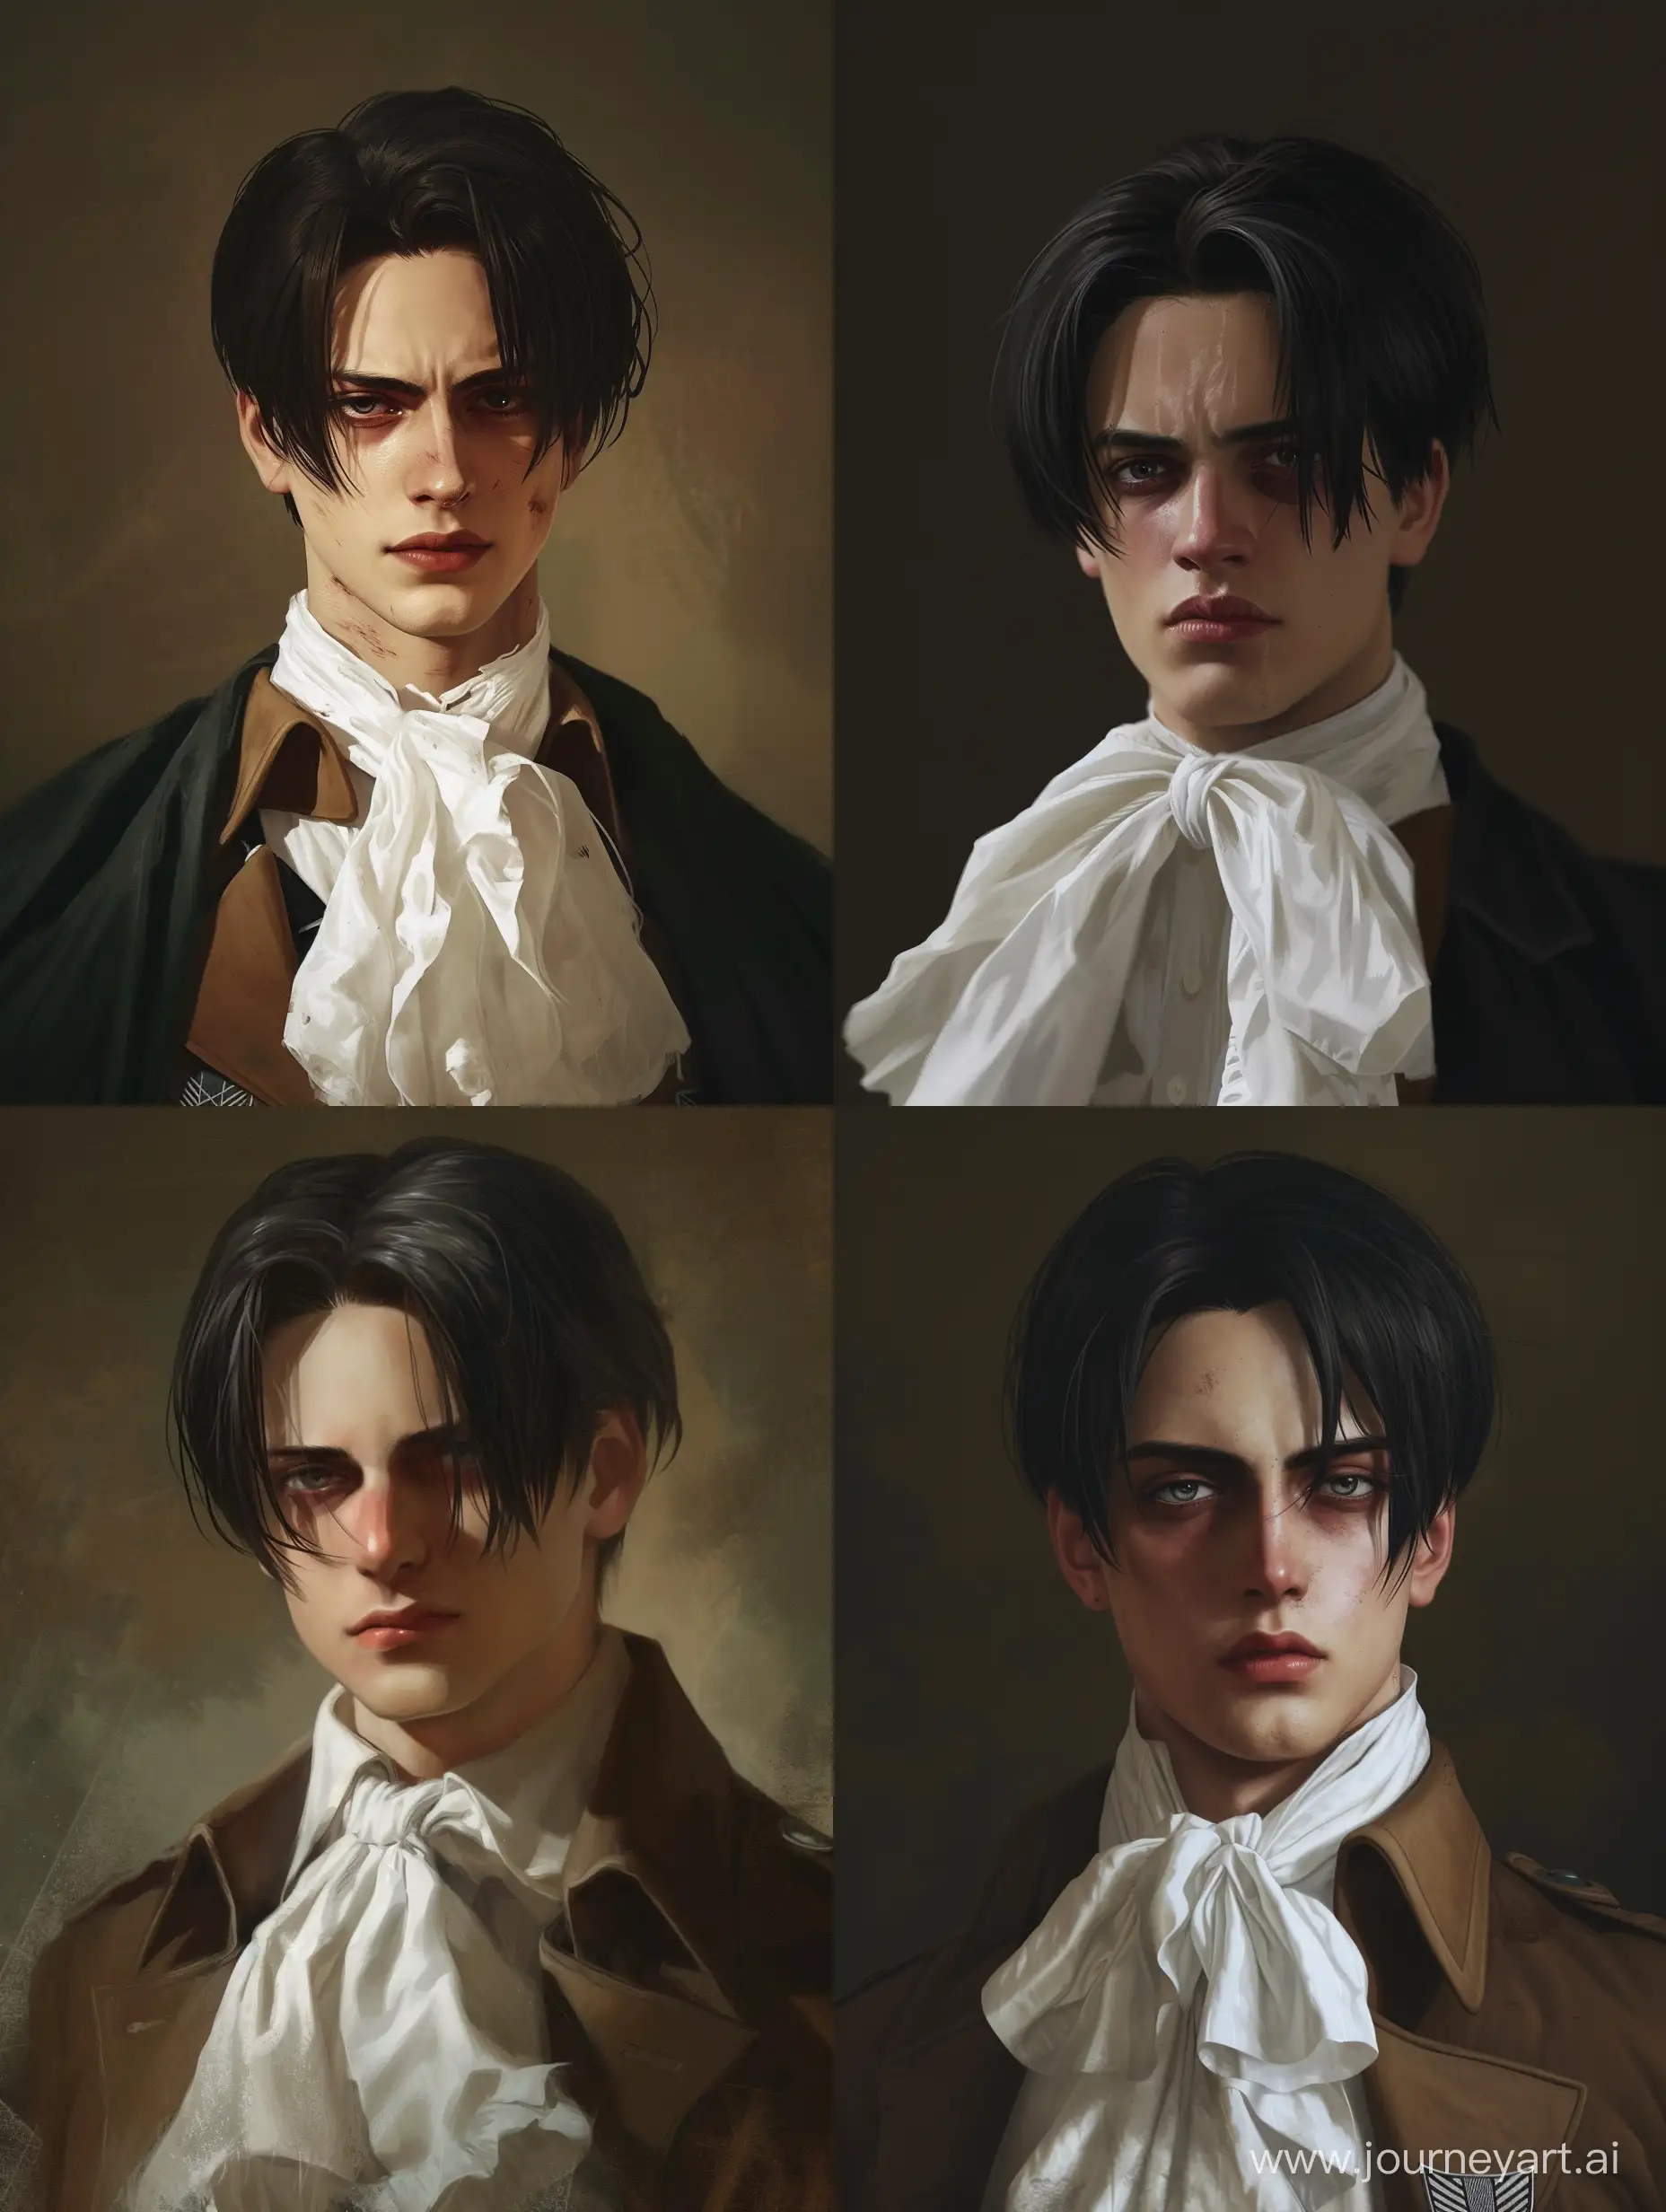 Realistic Levi Ackerman from Attack on Titan, in his 30s, with normal dark circles, slight mocking smirk, with white cravat